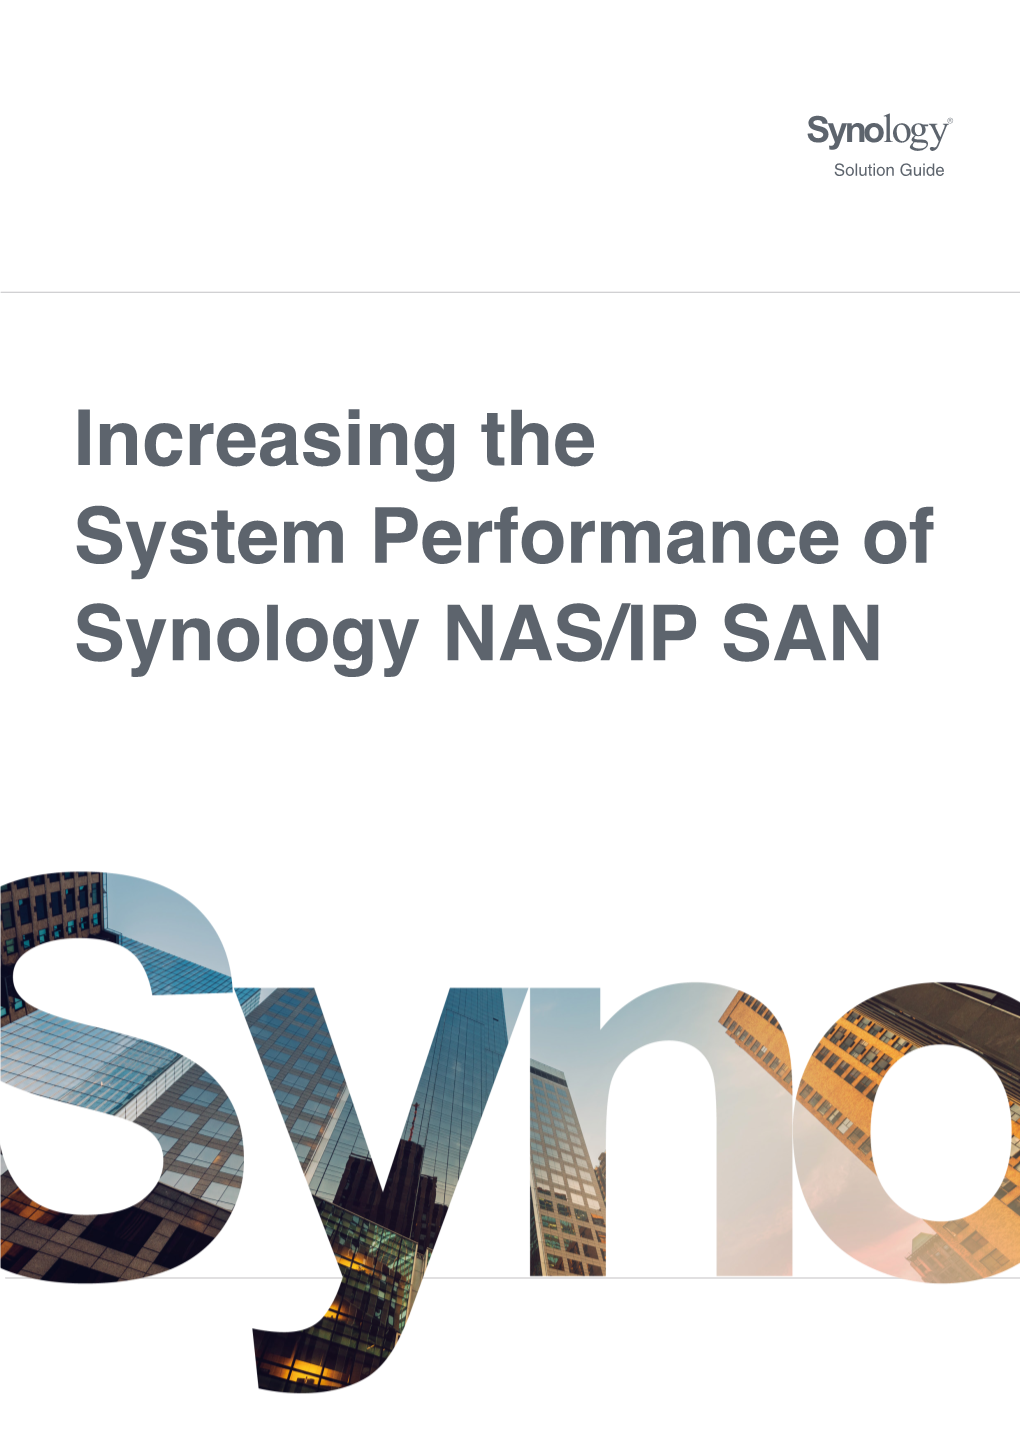 Increasing the System Performance of Synology NAS/IP SAN ﻿